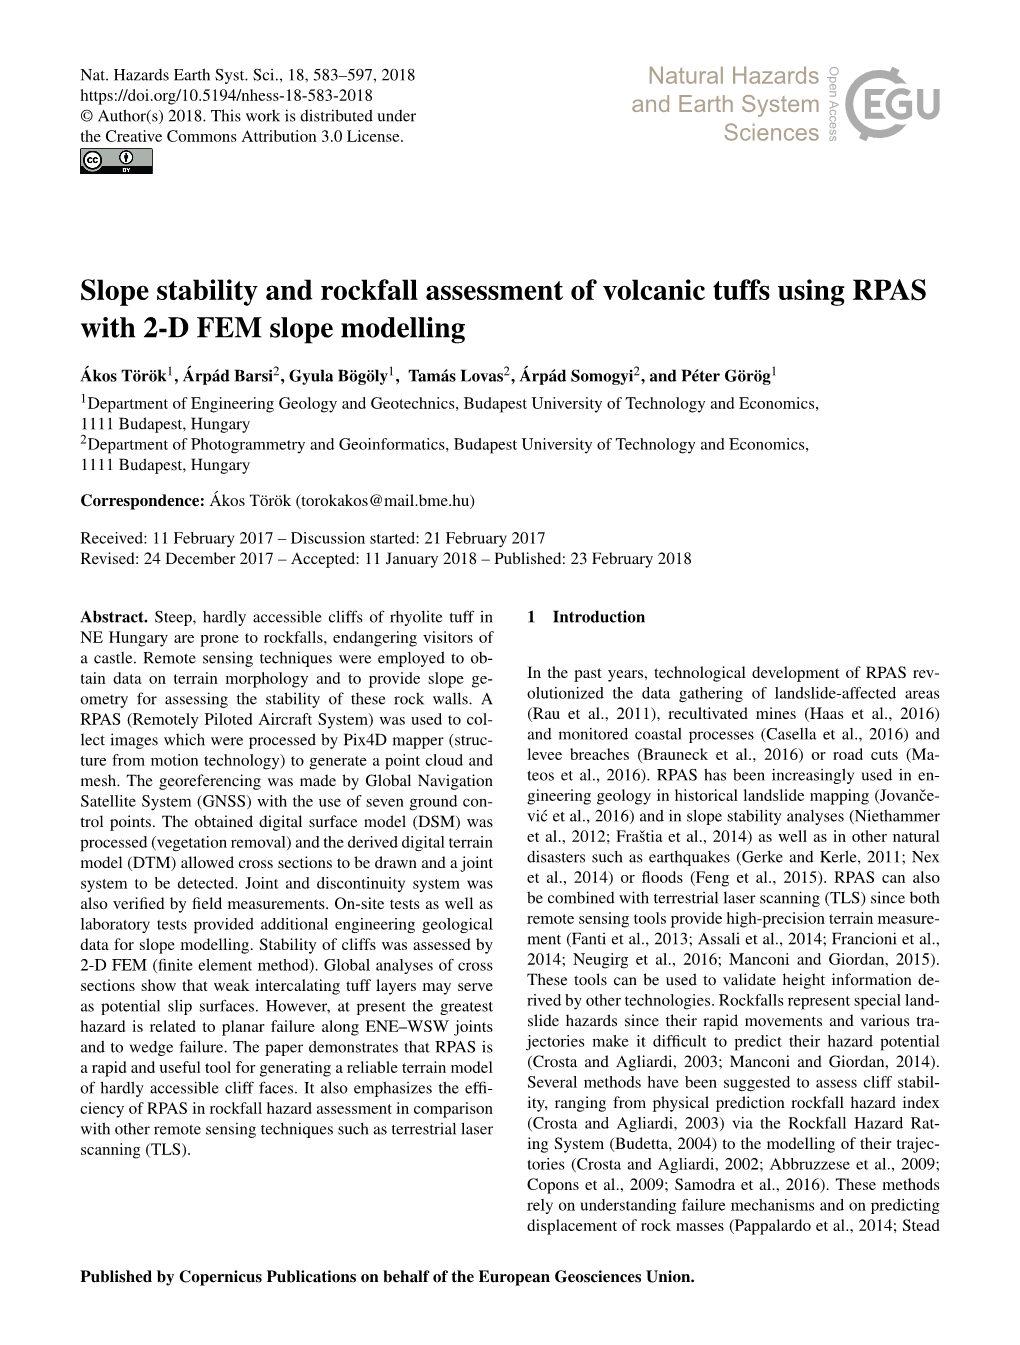 Slope Stability and Rockfall Assessment of Volcanic Tuffs Using RPAS with 2-D FEM Slope Modelling